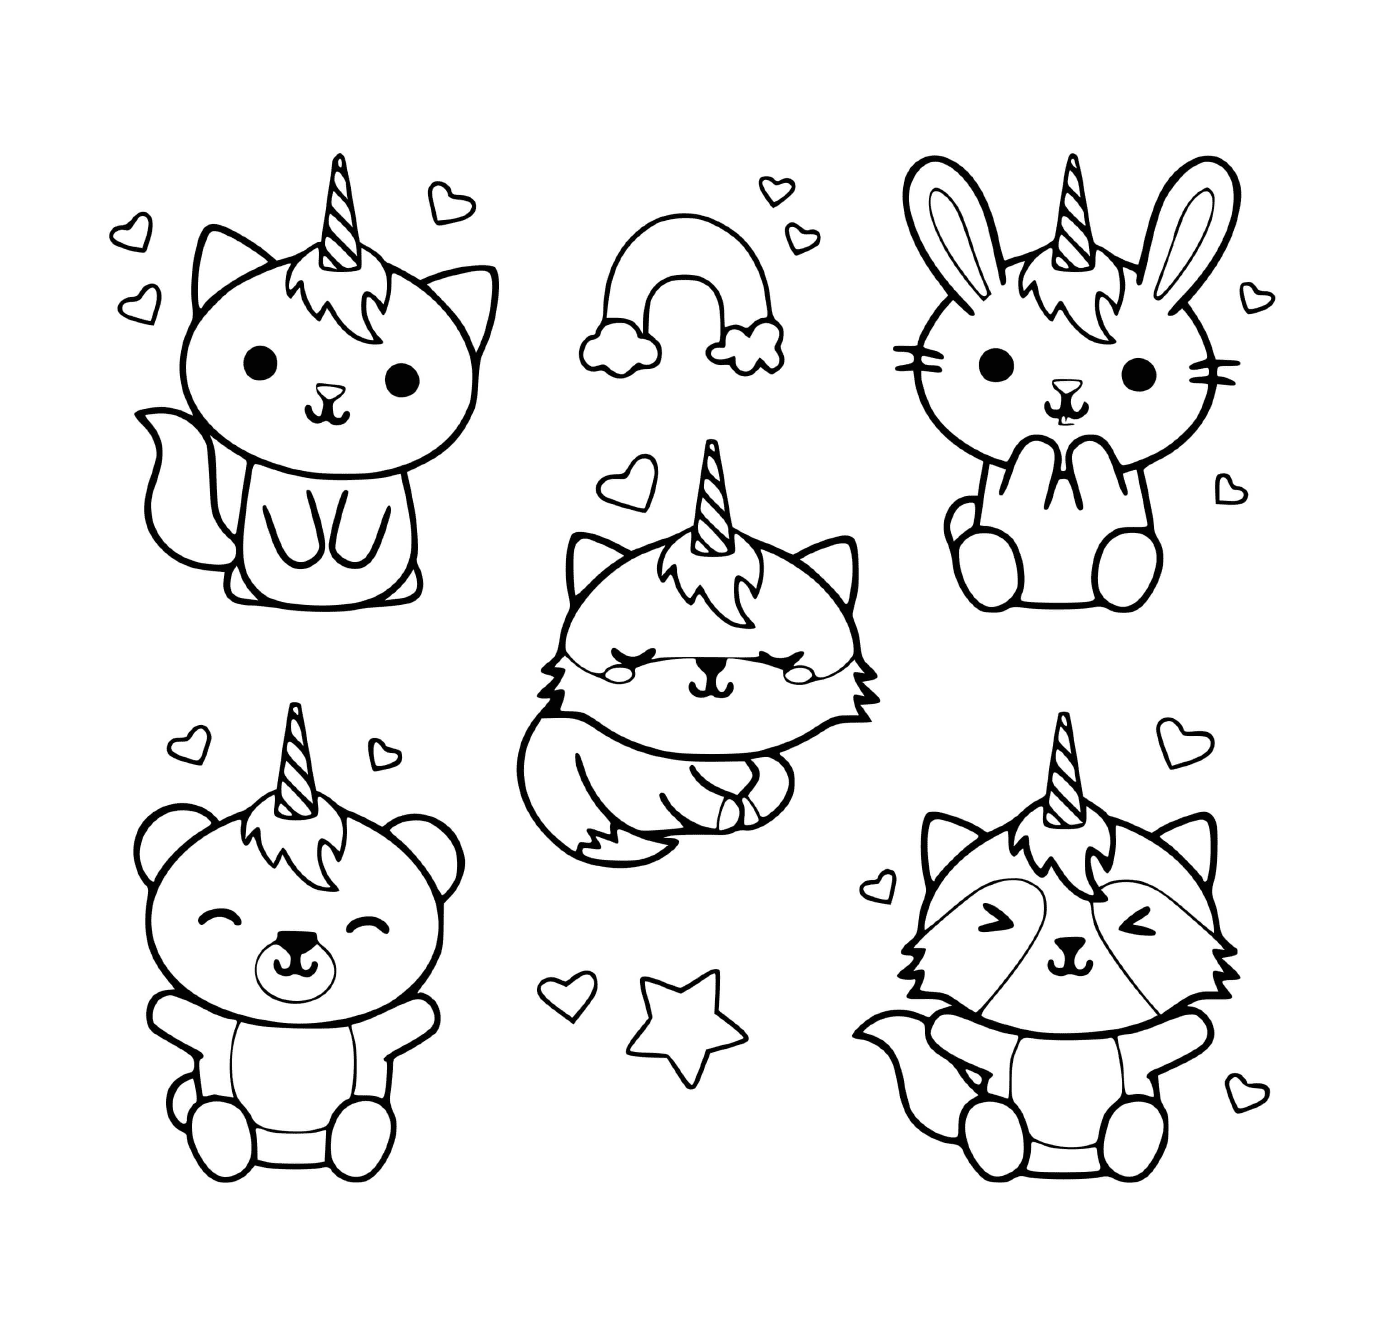  set of six cute animals with horns 